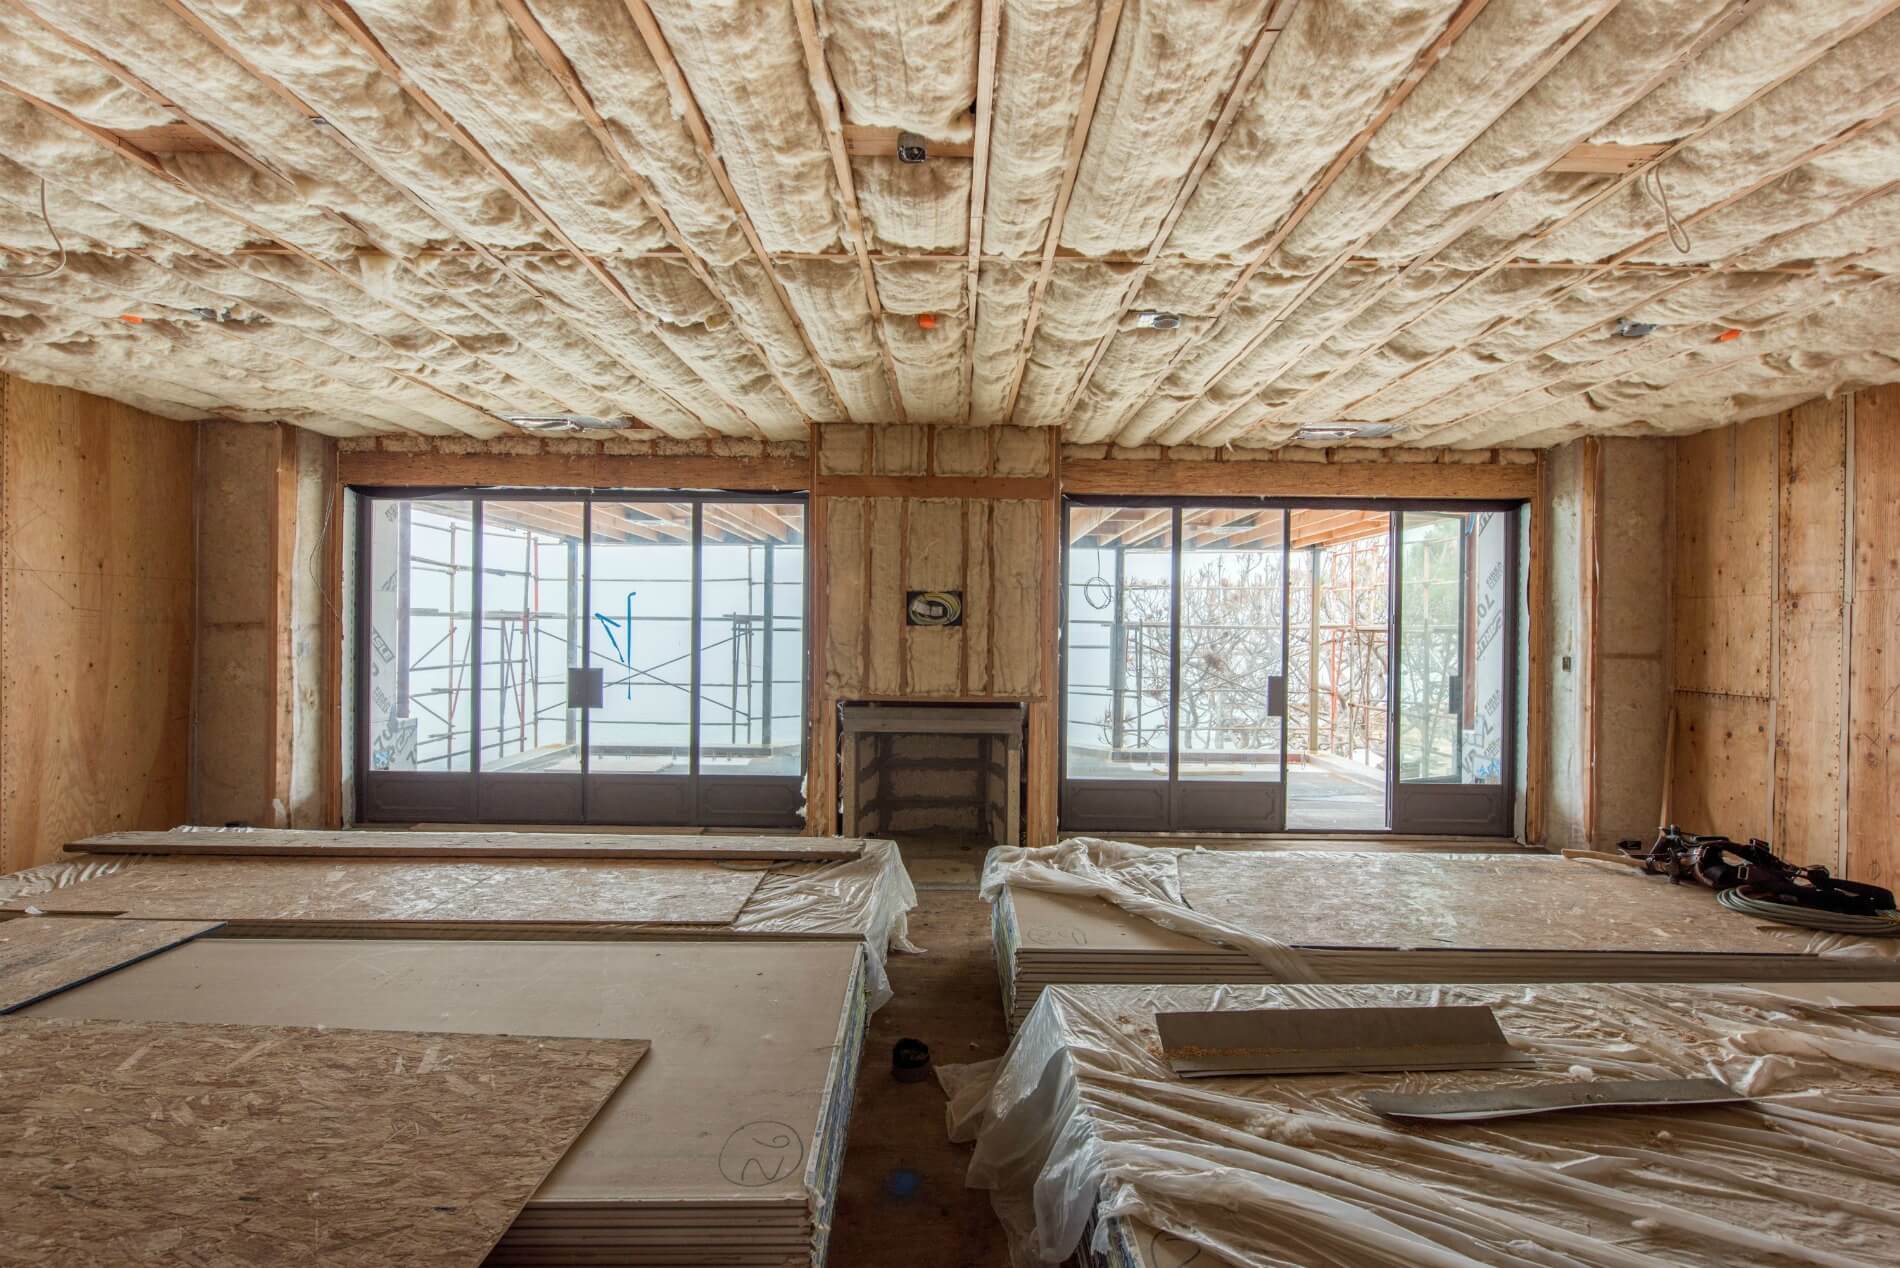 Where To Insulate In A Home